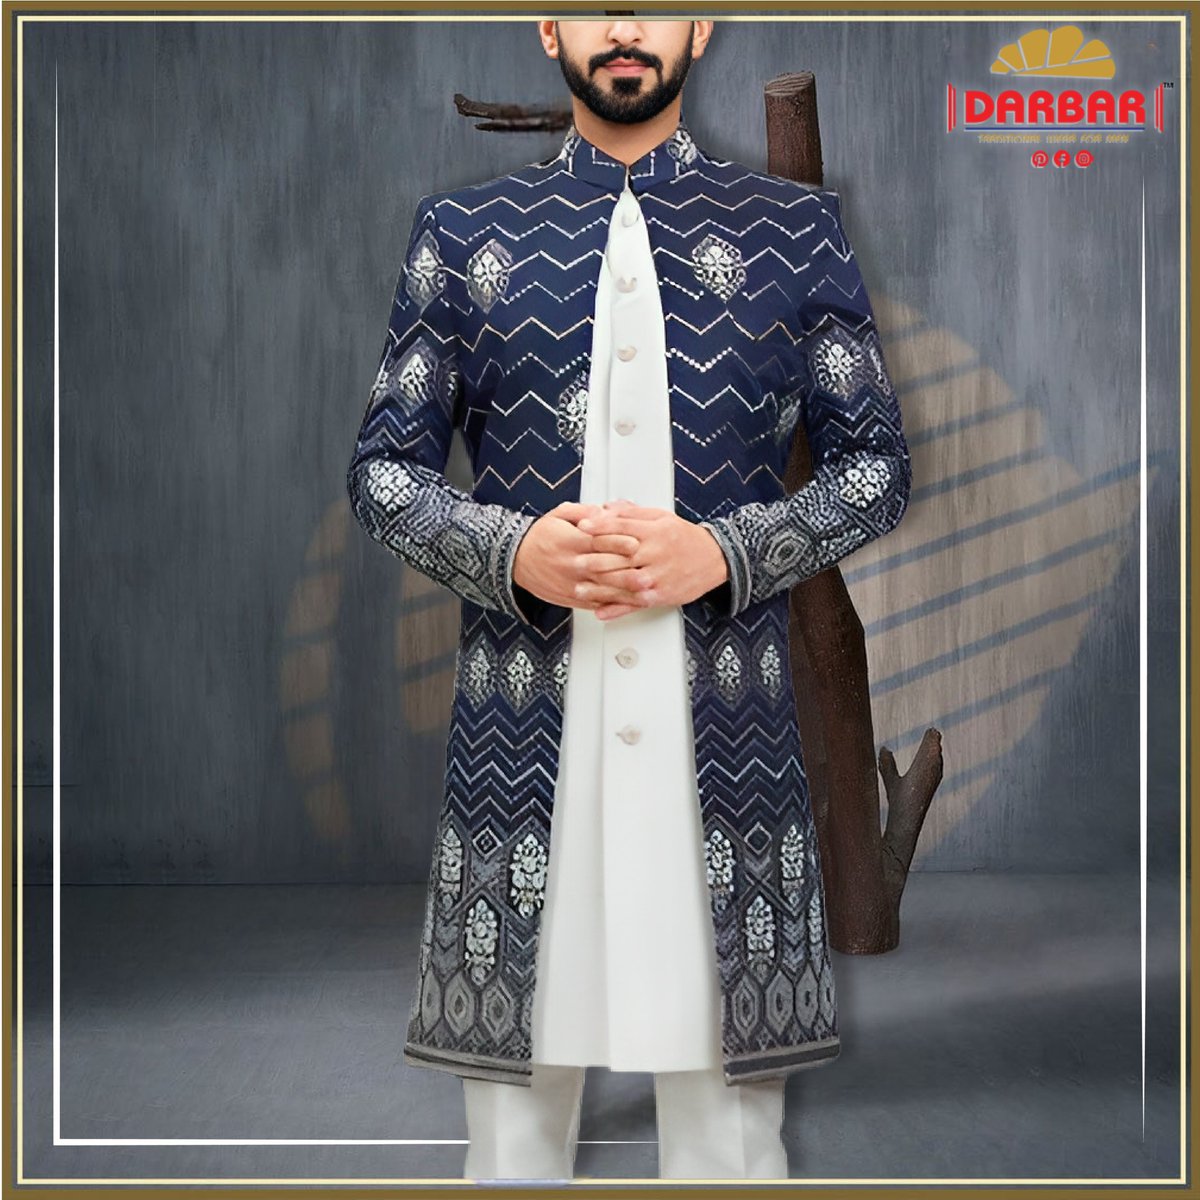 Step into the elegance of tradition, dance into the grandeur of celebration. Sway to the Sangeet in style.
.
.
.
#darbarmenswear #mensfashion #wedding #indianwedding #sangeetoutfit #engagement #desifashion #festivewear #sangeetnight #trending #viral #bestoutfit #mensethnicwear